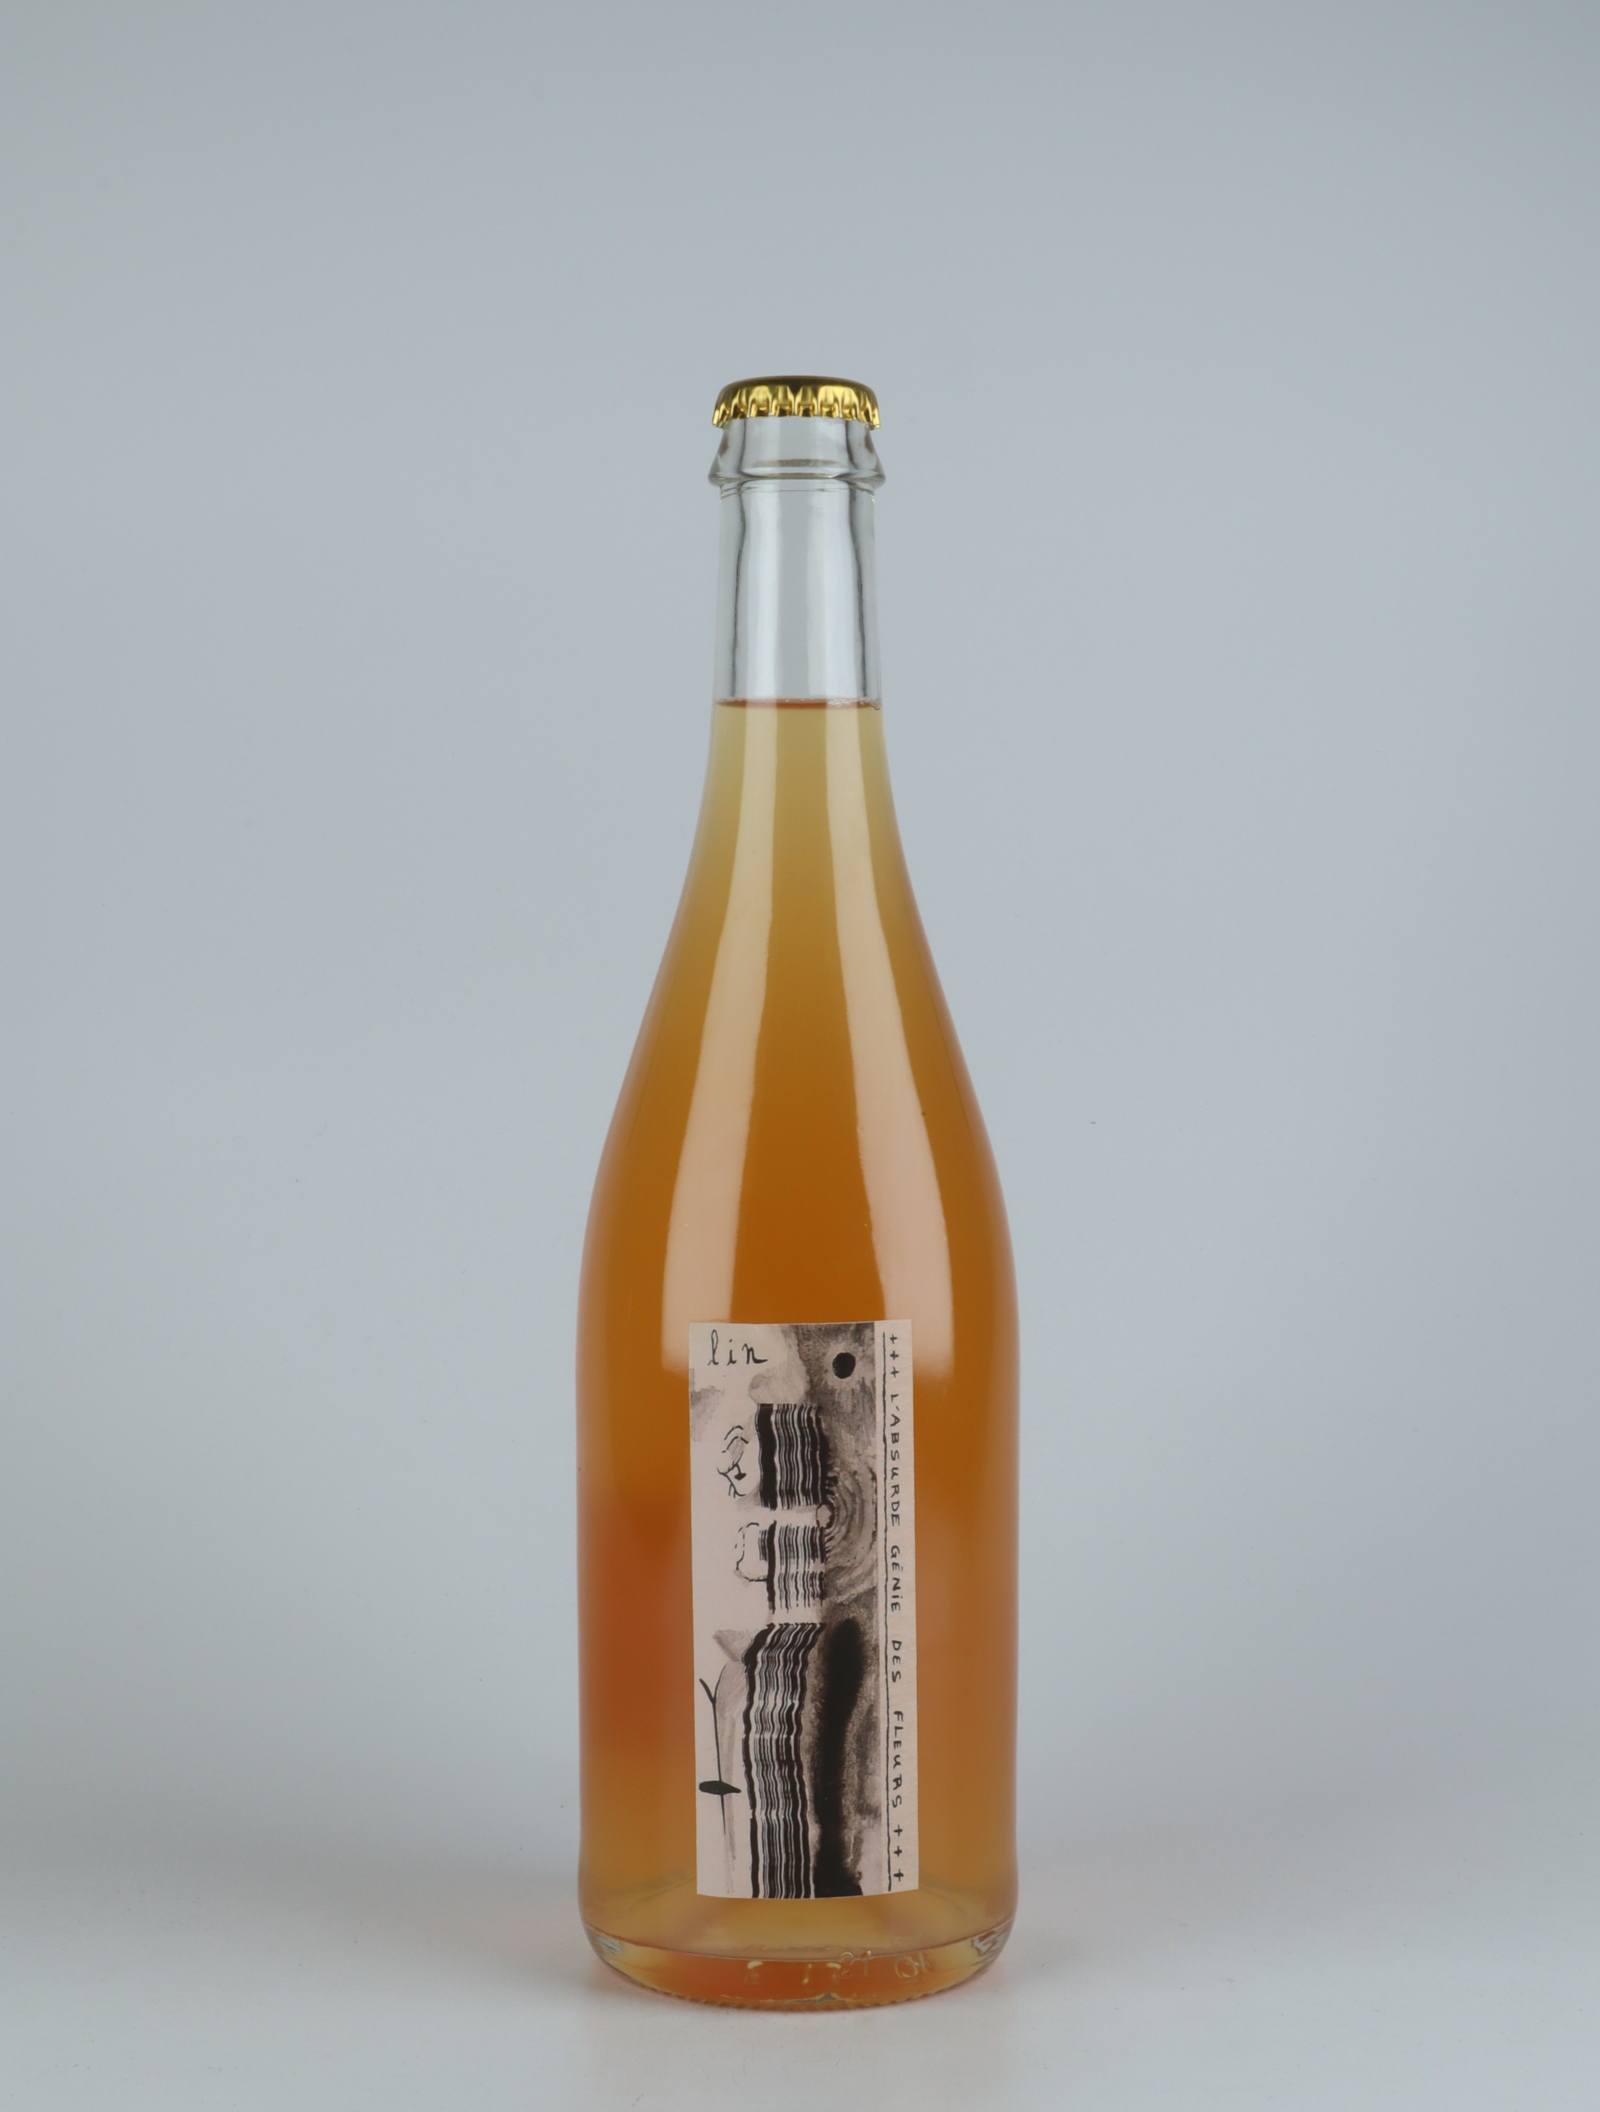 A bottle 2020 Lin White wine from Absurde Génie des Fleurs, Languedoc in France